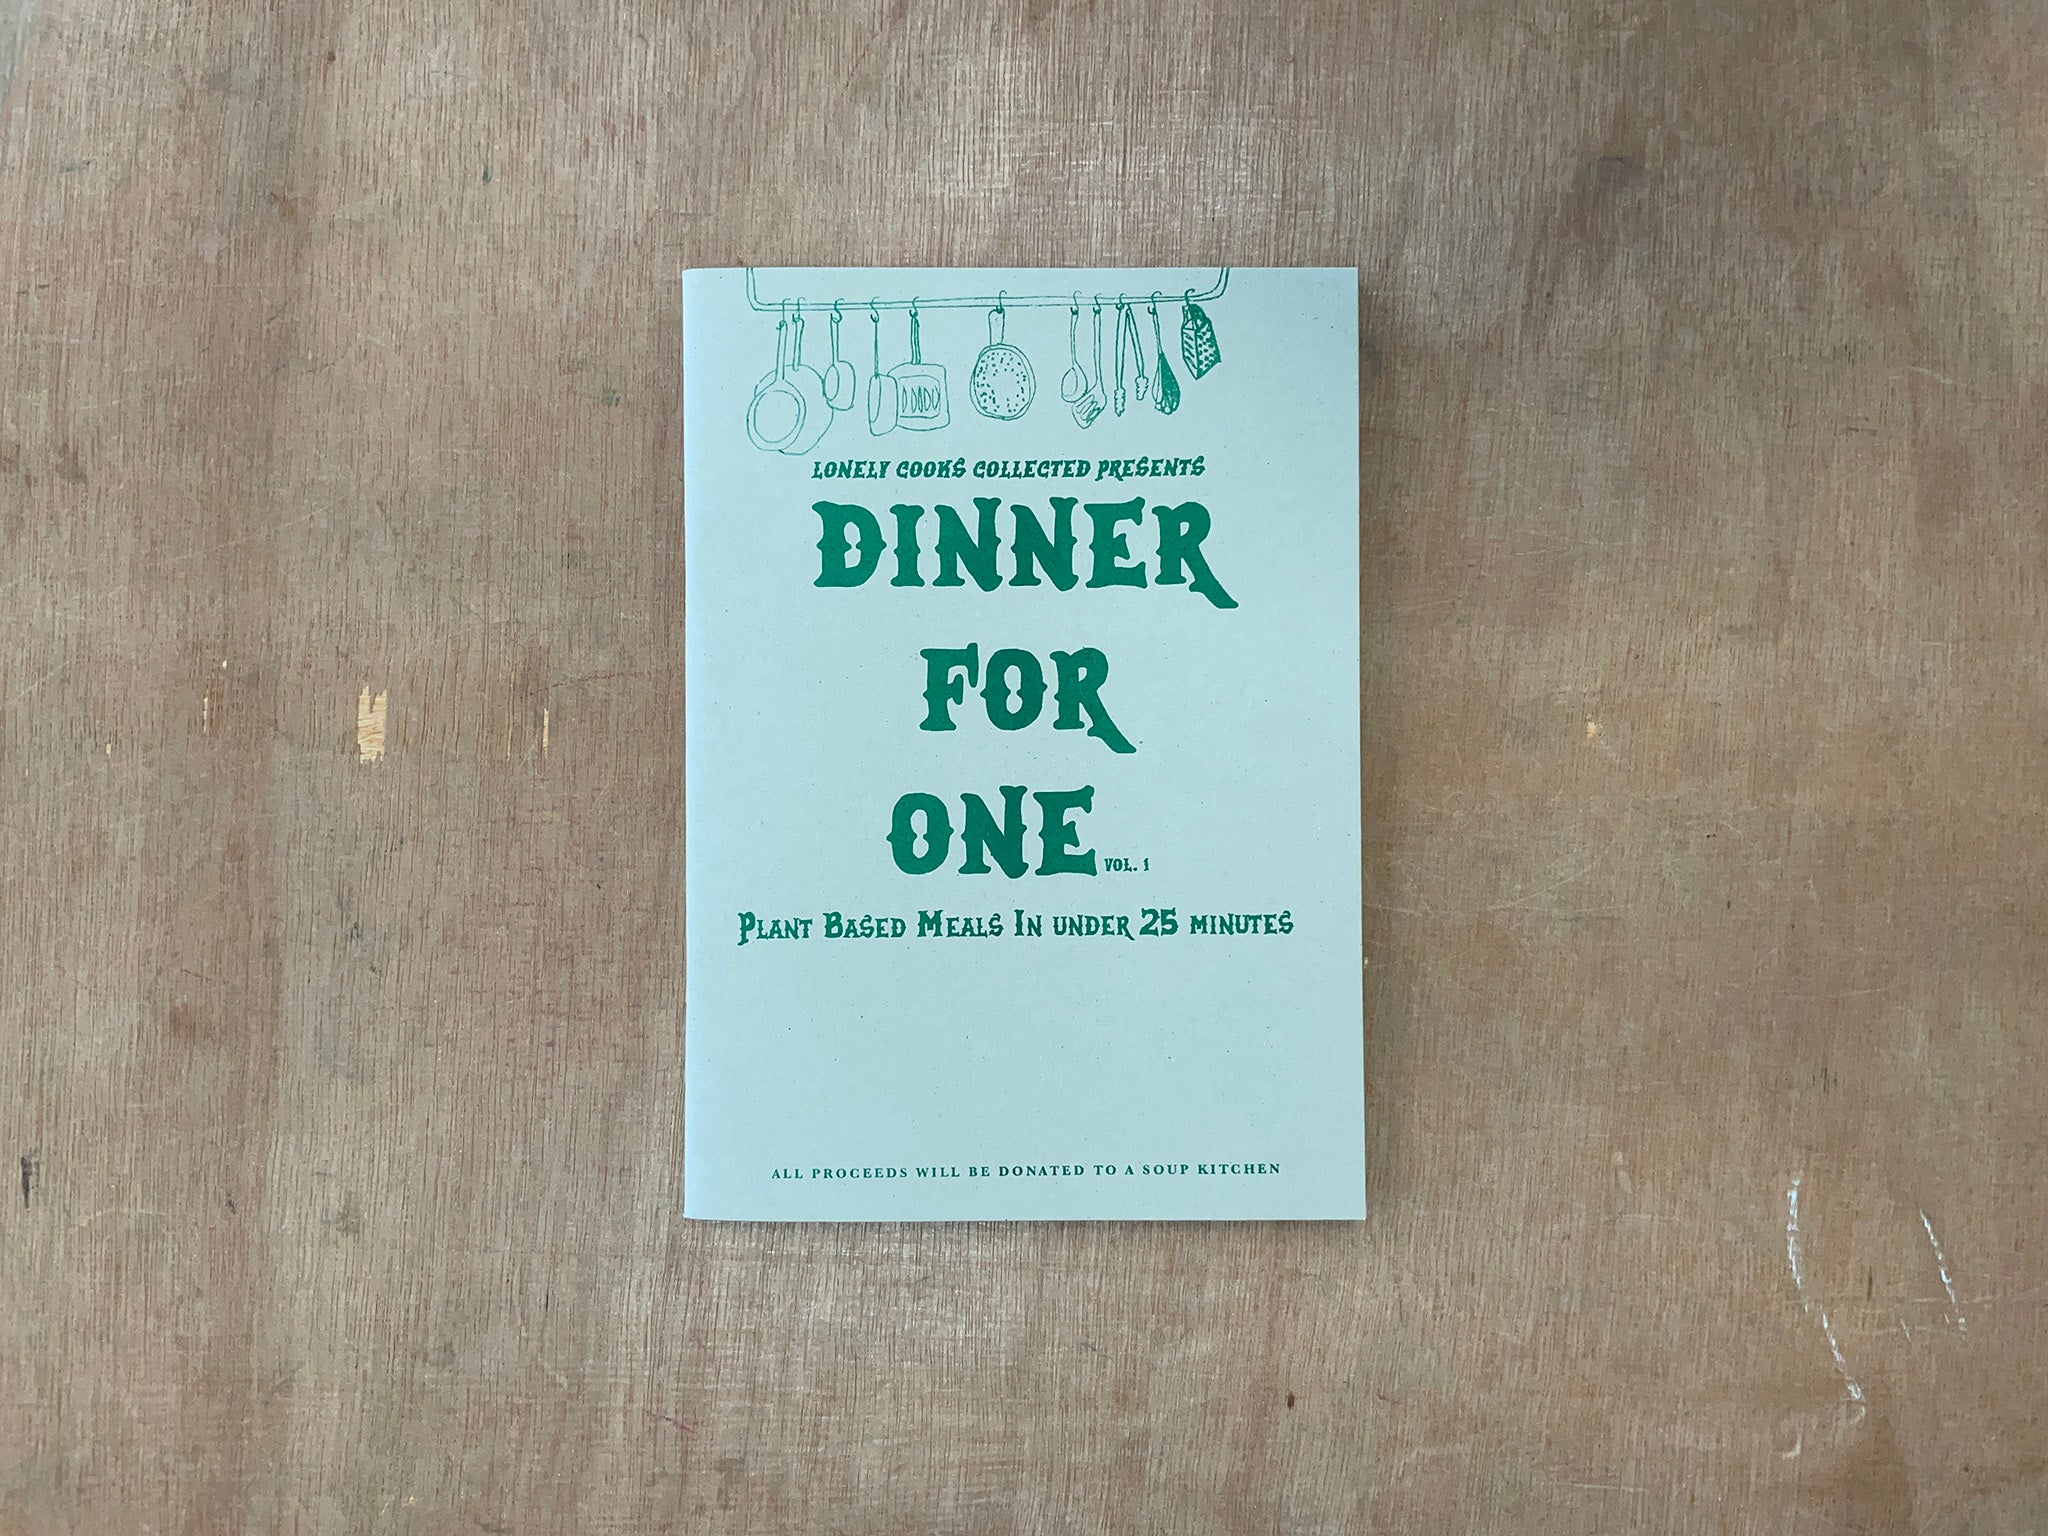 DINNER FOR ONE VOL. 1 - PLANT BASED MEALS IN UNDER 25 MINUTES by Lonely Cooks Collected